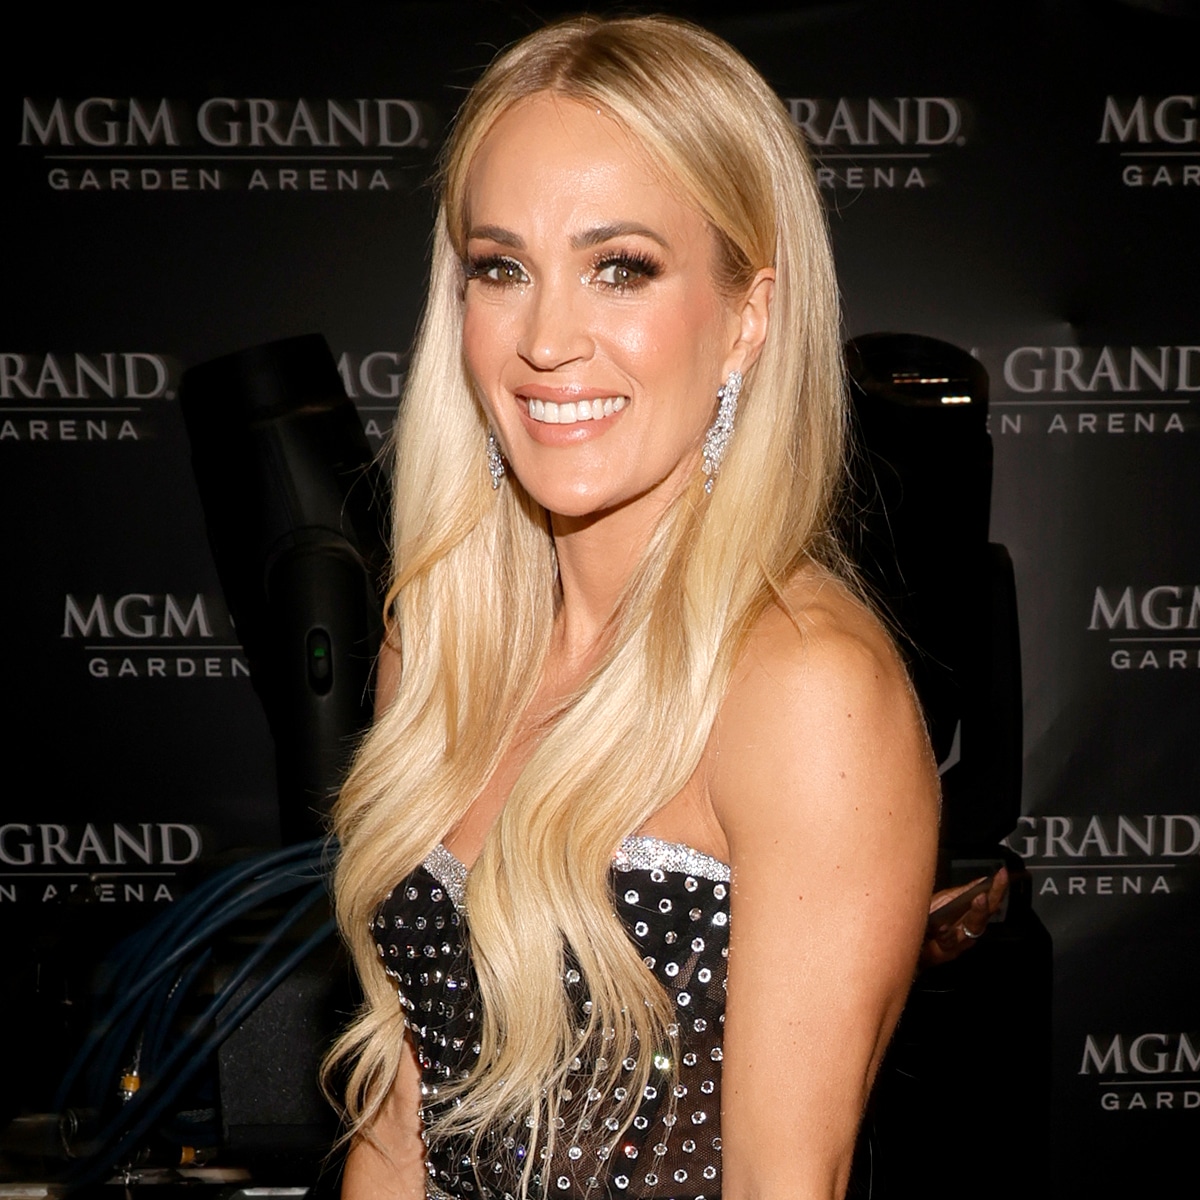 Carrie Underwood Sparkles in Purple Dress & 5-Inch Heels at CMT Awards